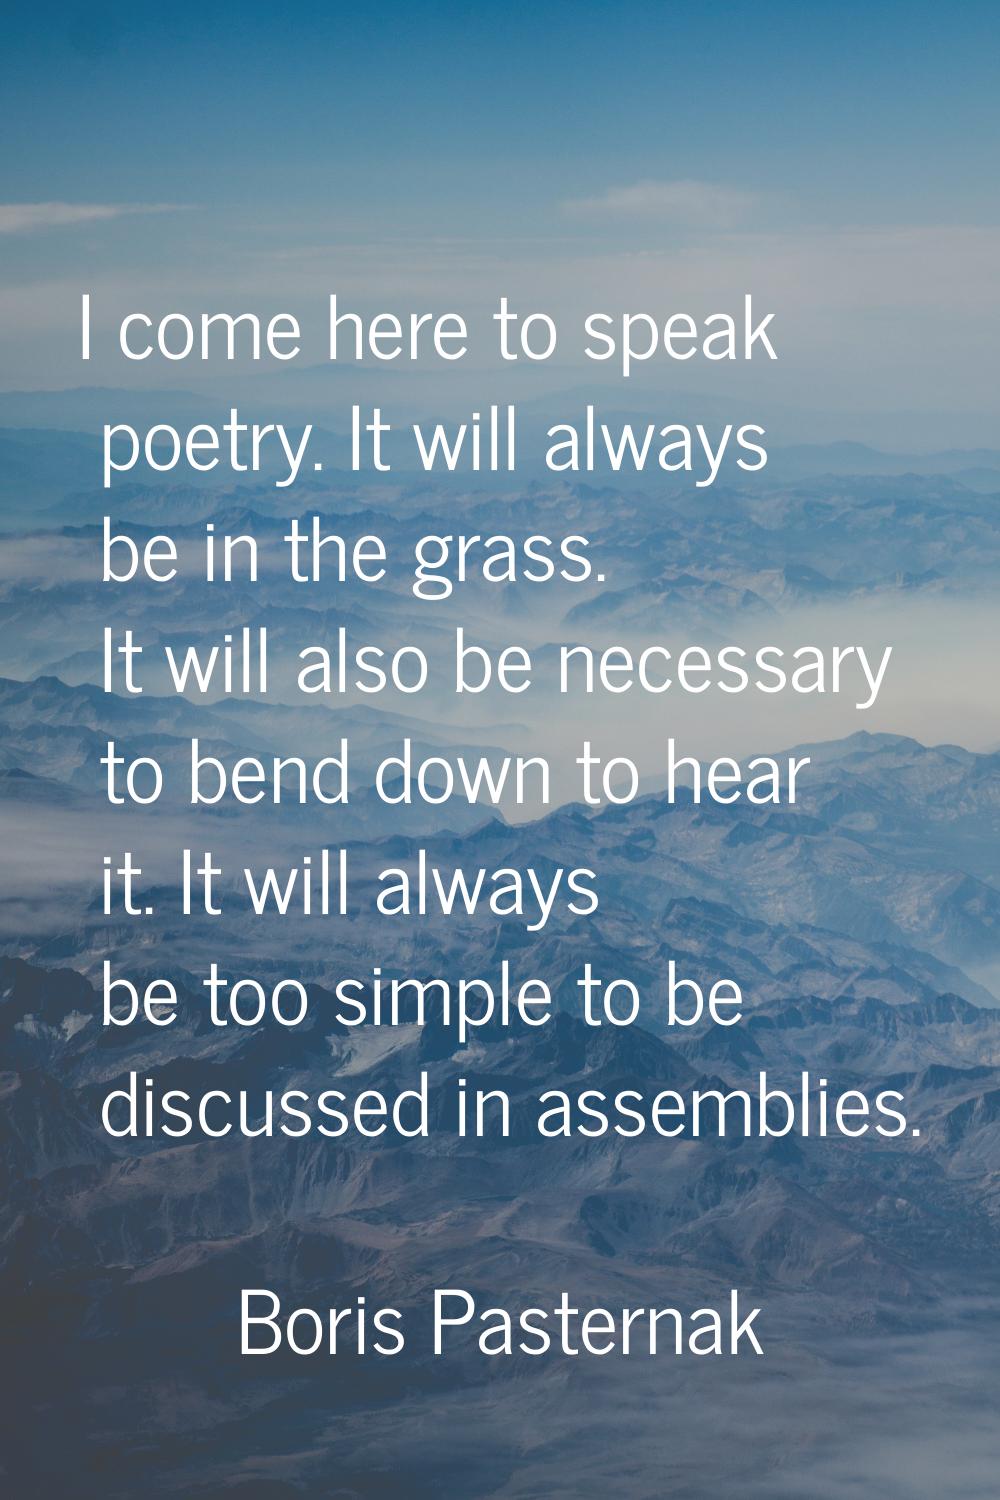 I come here to speak poetry. It will always be in the grass. It will also be necessary to bend down